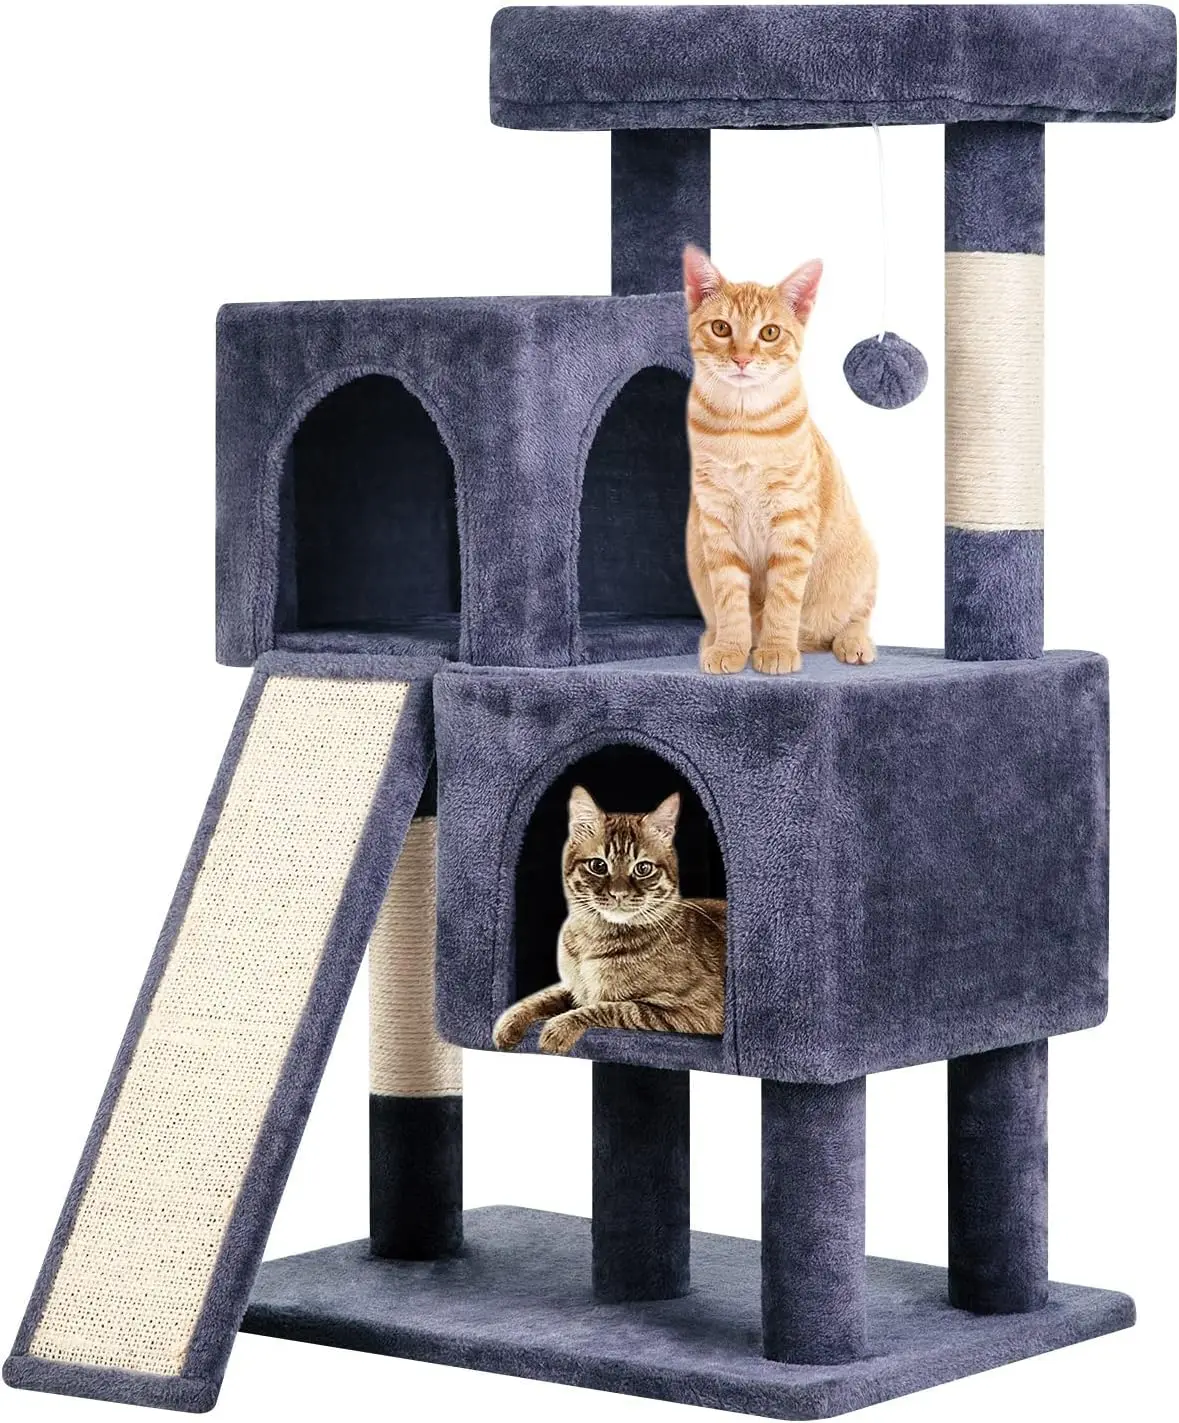 

36 inches Cat Tree for Indoor Cats Cat Tower with Scratching Posts Multi-Level Furniture Condo with Ramp, Spacious Cat Cave